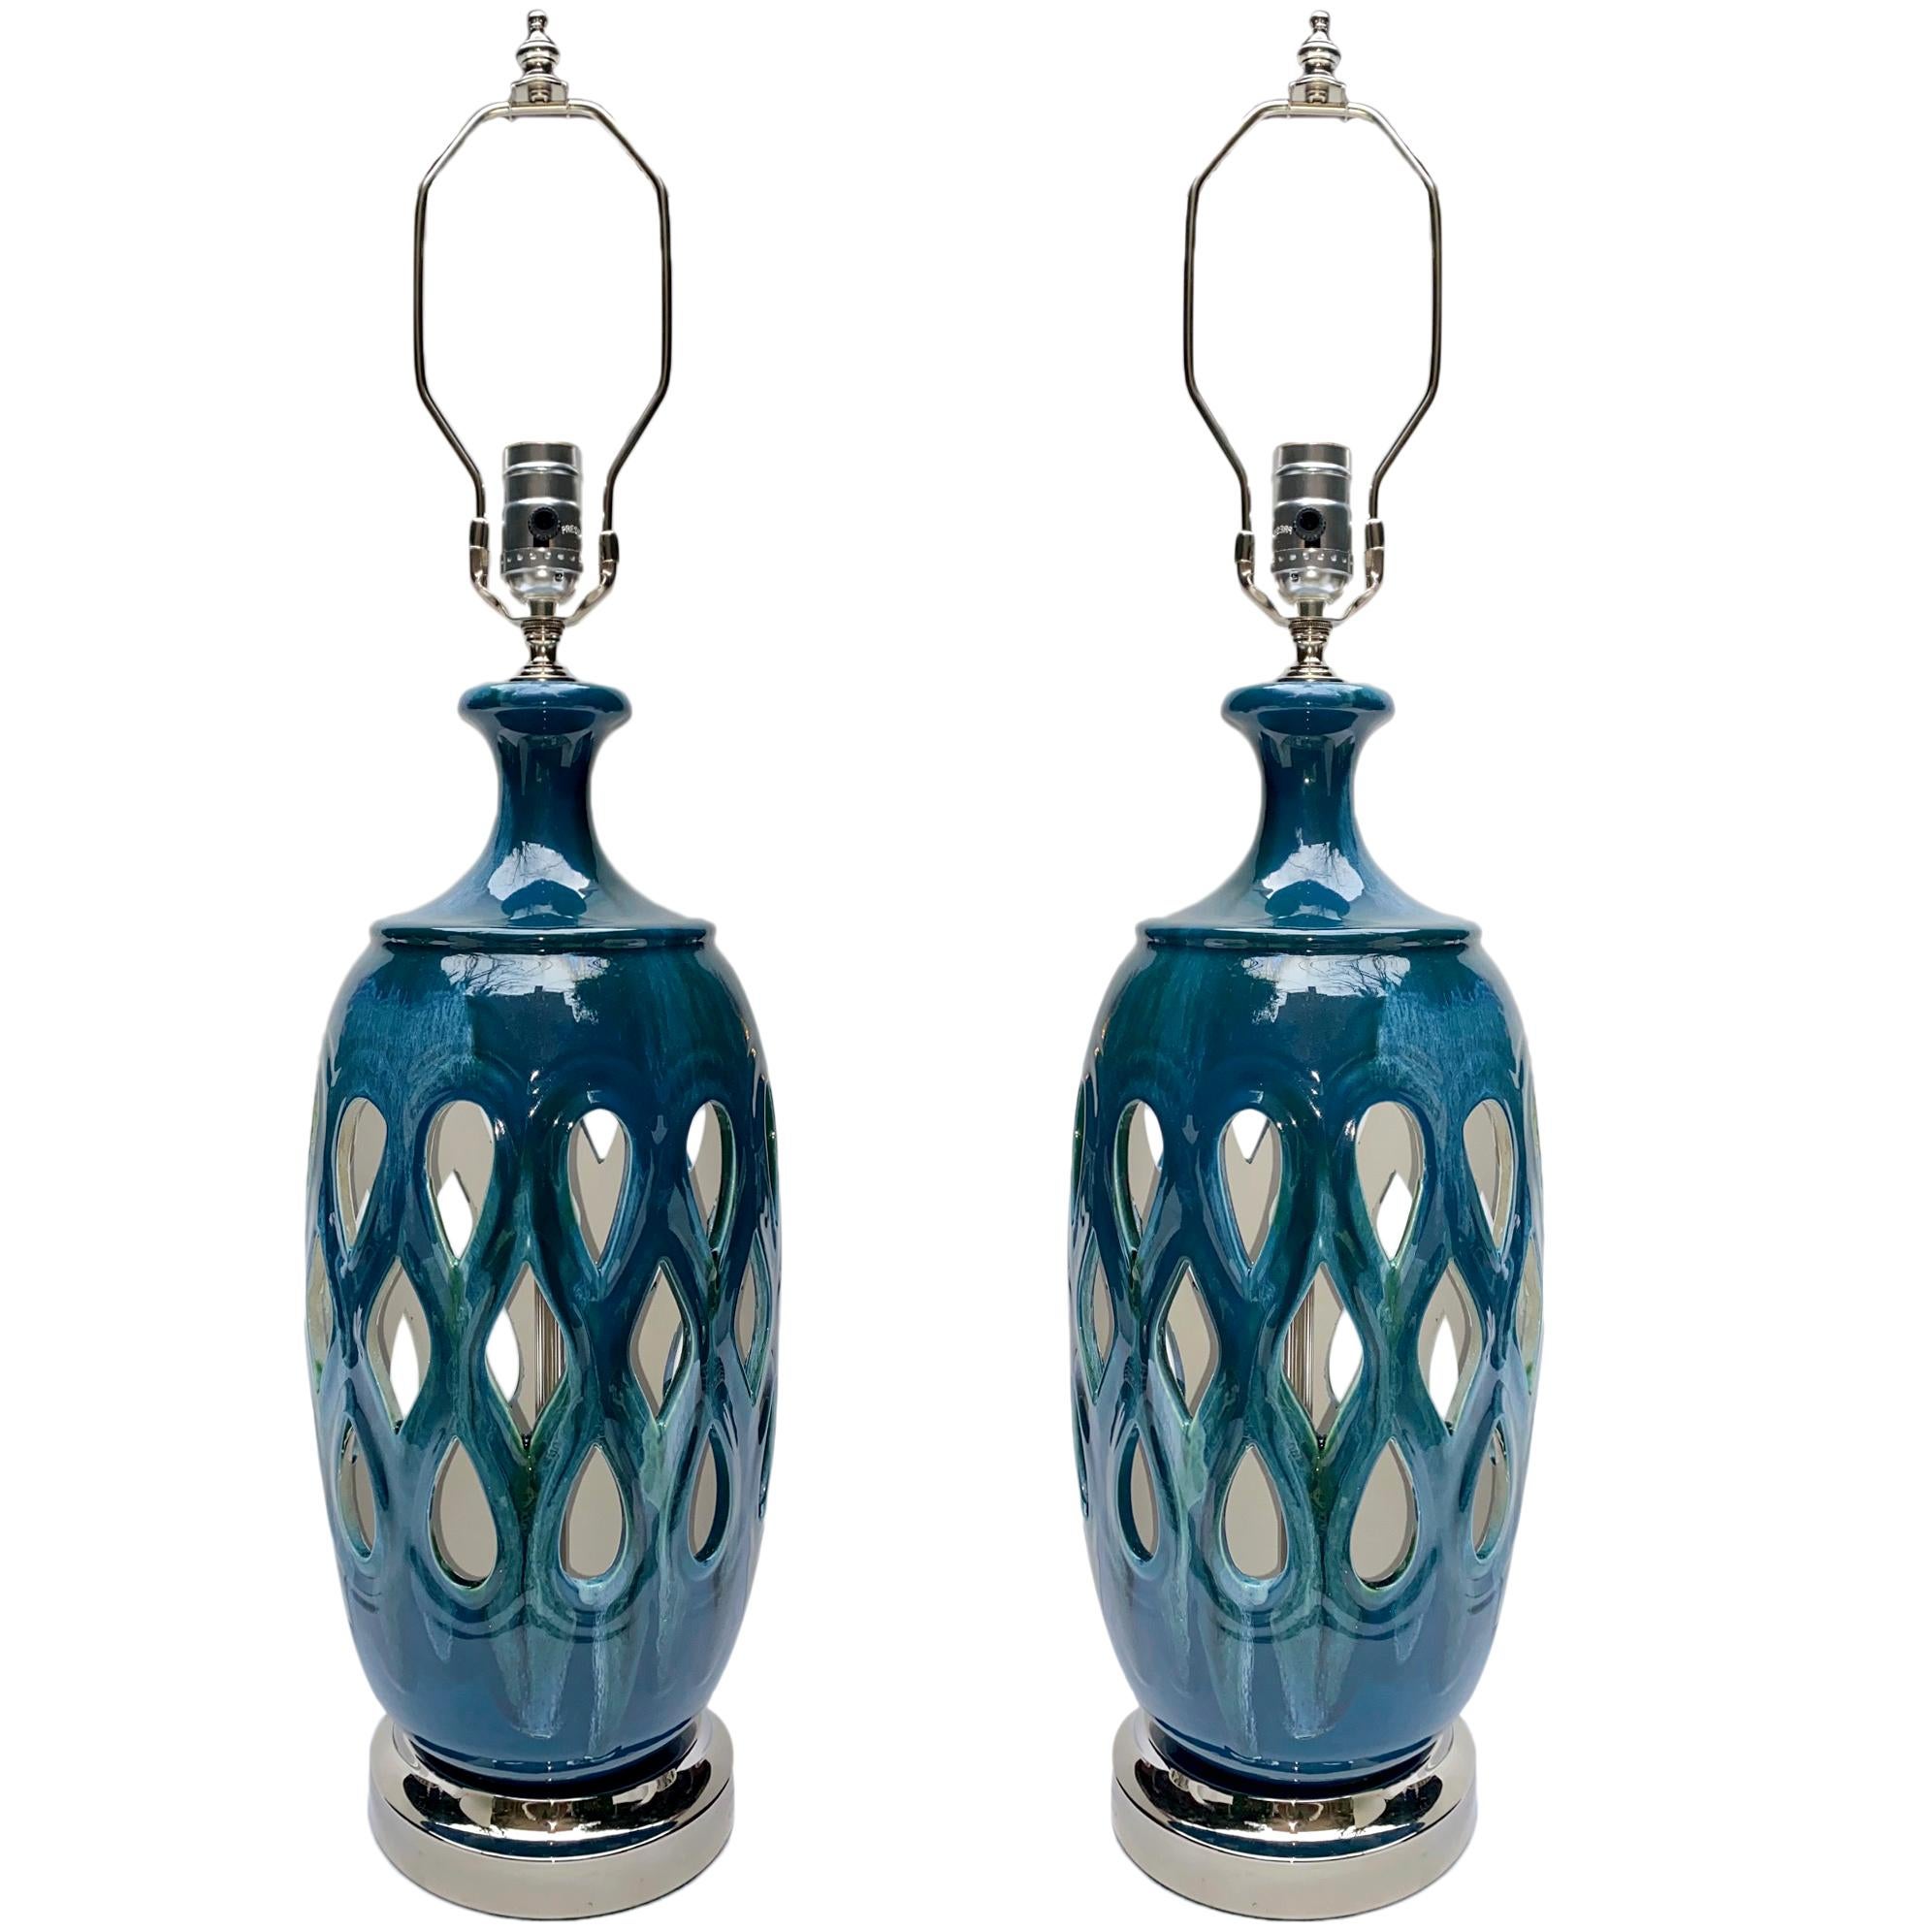 Pair of Italian 1950's blue porcelain lamps with silver plated bases.

Measurements:
Height of body: 19